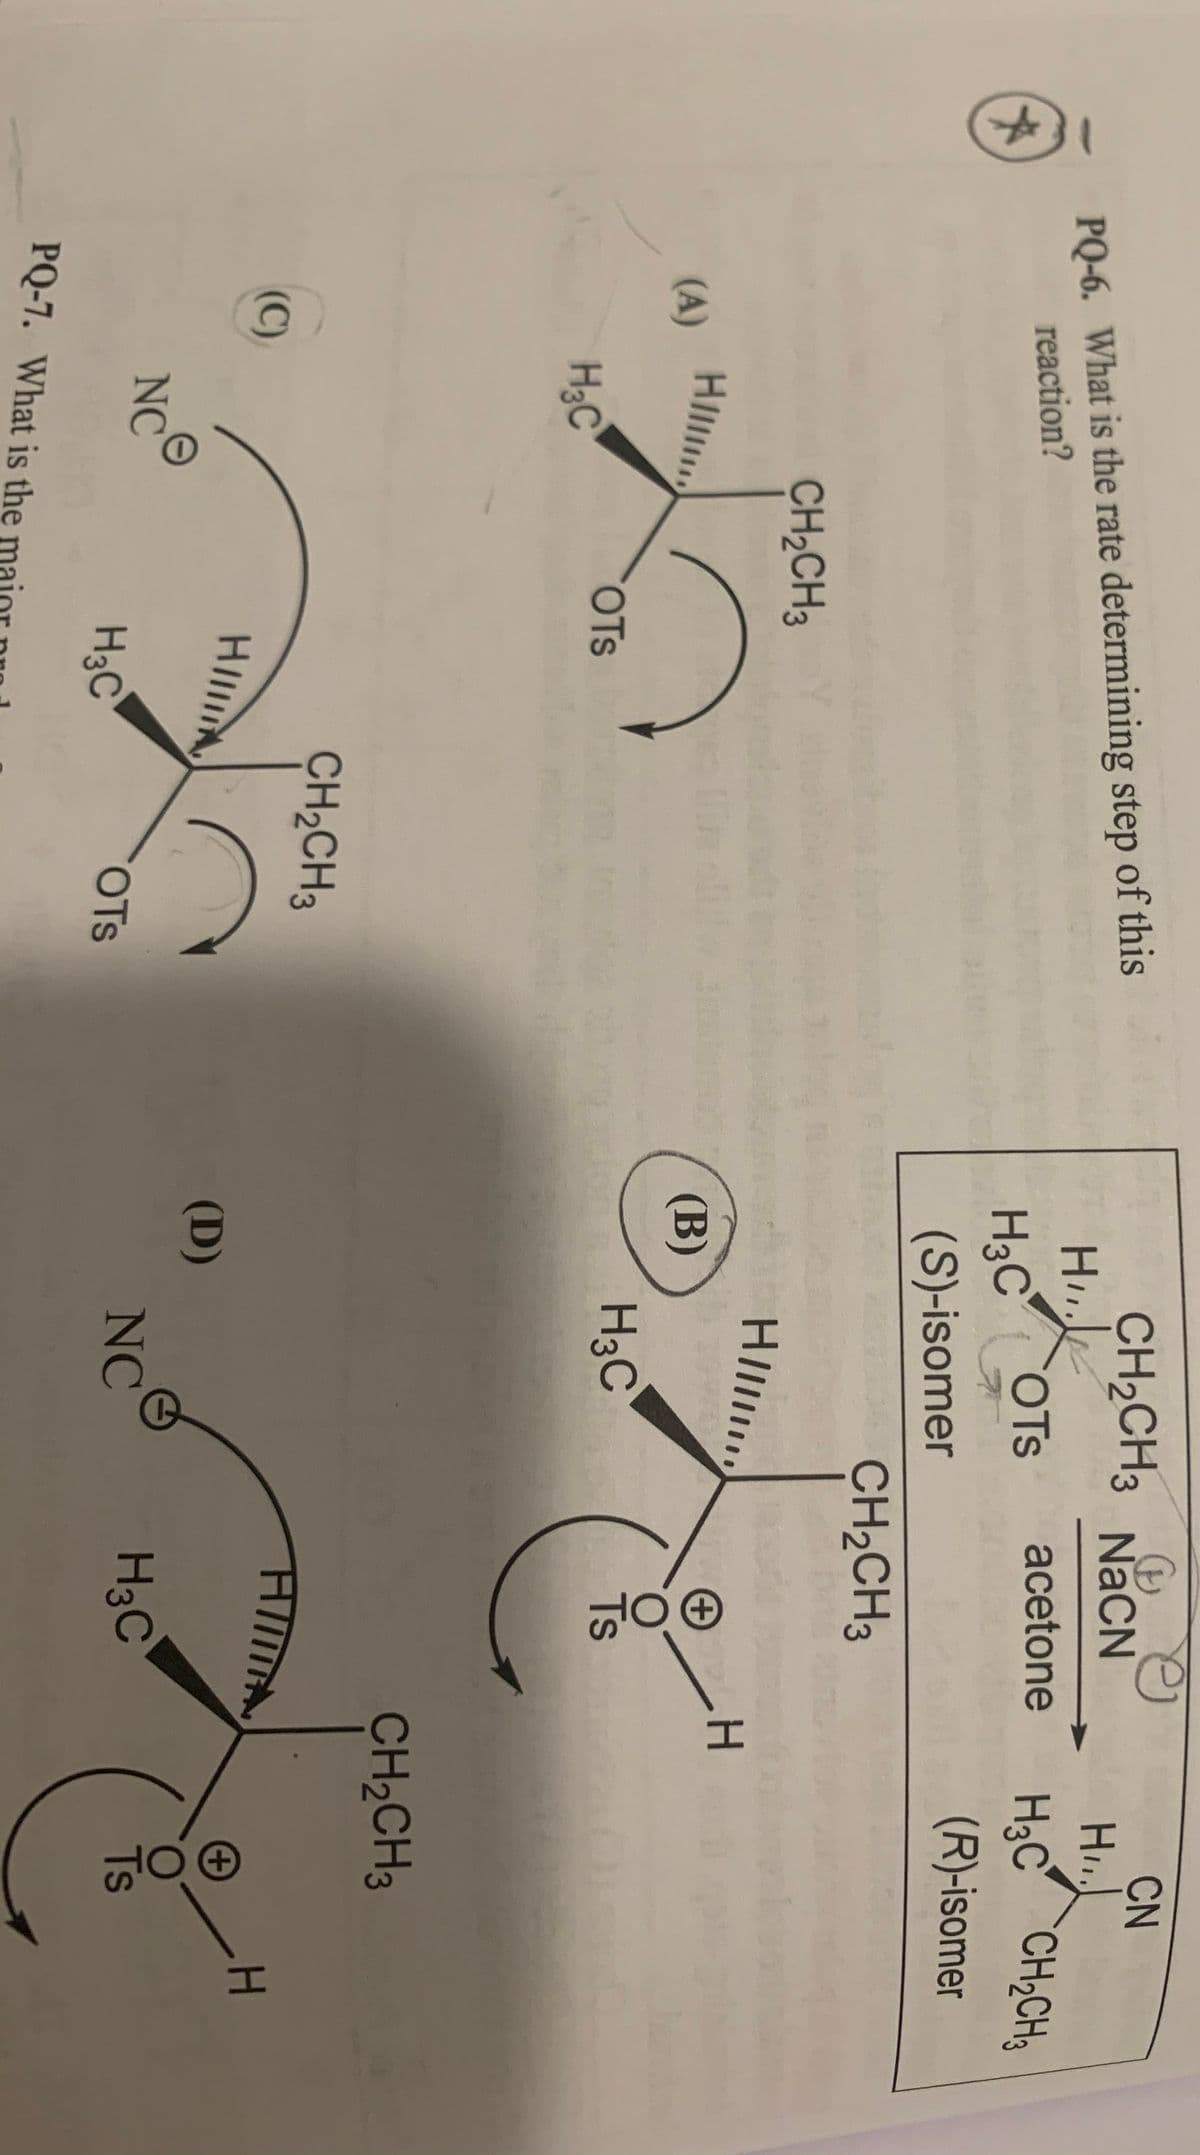 CN
CH2CH3 NaCN
H
PQ-6. What is the rate determining step of this
H3C CH;CH3
H3C OTS
(S)-isomer
acetone
reaction?
(R)-isomer
CH2CH3
CH2CH3
HIl
H.
HIl
(A)
(В)
H3C
O.
Ts
OTs
H3C
CH2CH3
CH2CH3
(C)
HIA
(D)
NC
NC
H3C
Ts
H3C
OTS
PQ-7. What is the
